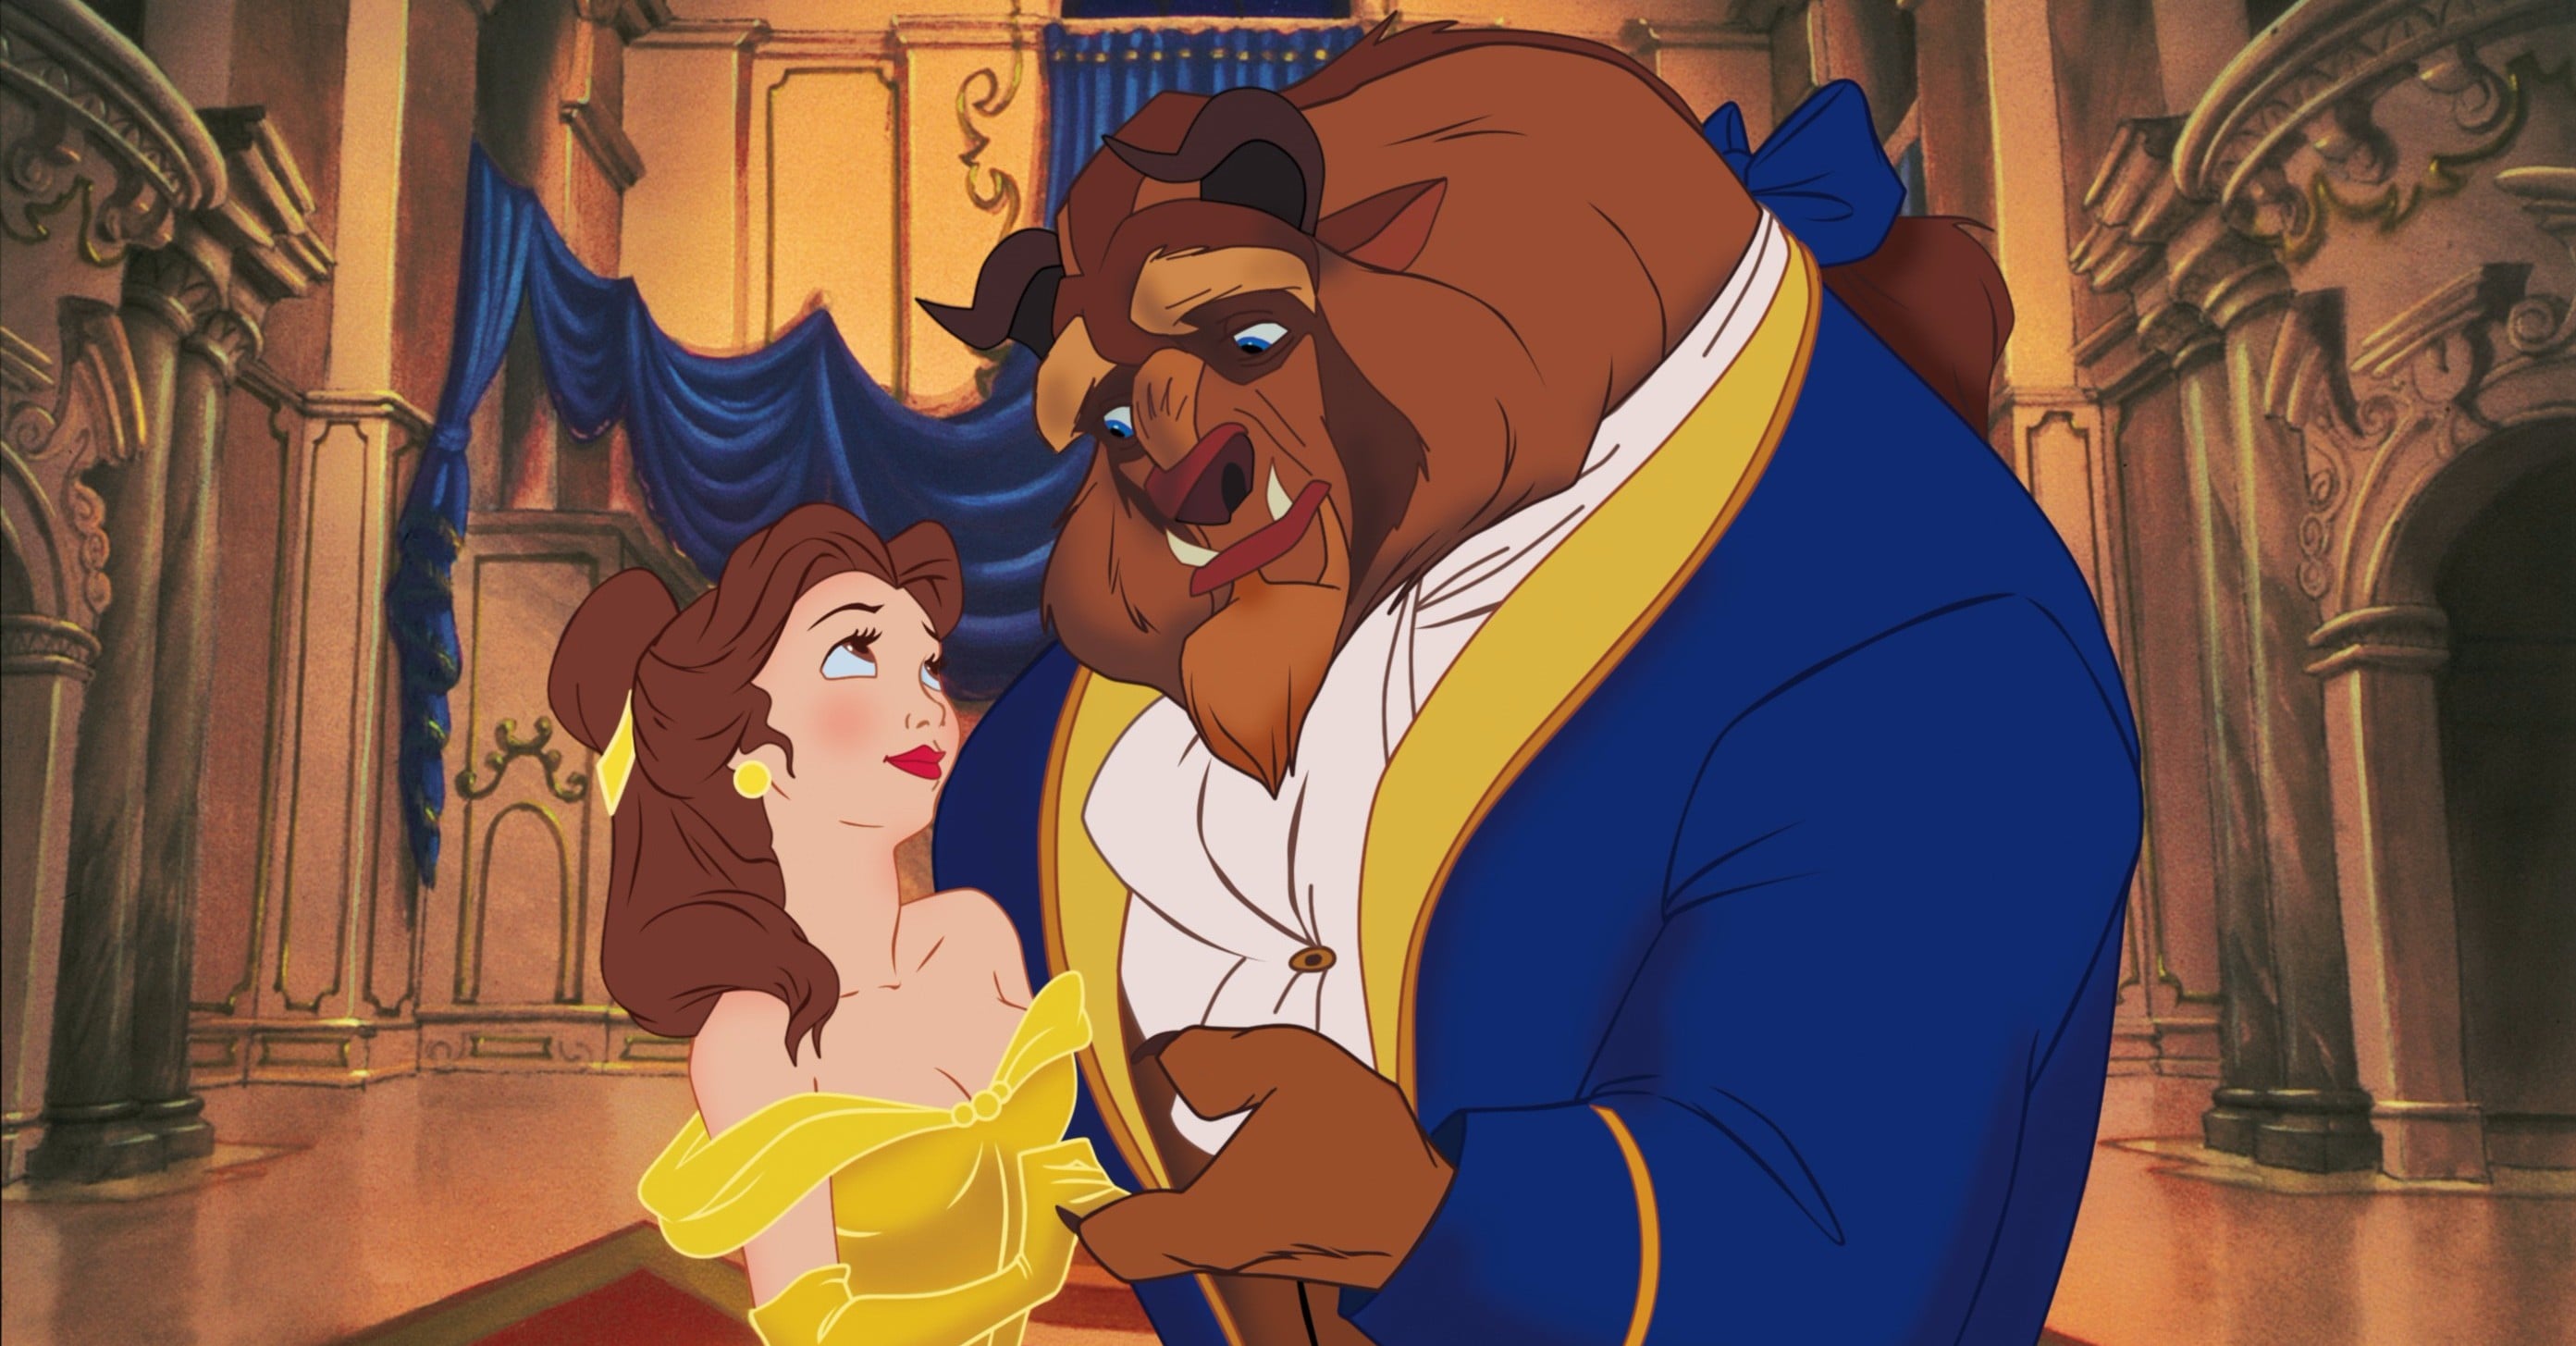 Beauty Beast Porn Captions - Why Beauty and the Beast Is the Best Disney Movie | POPSUGAR Love & Sex